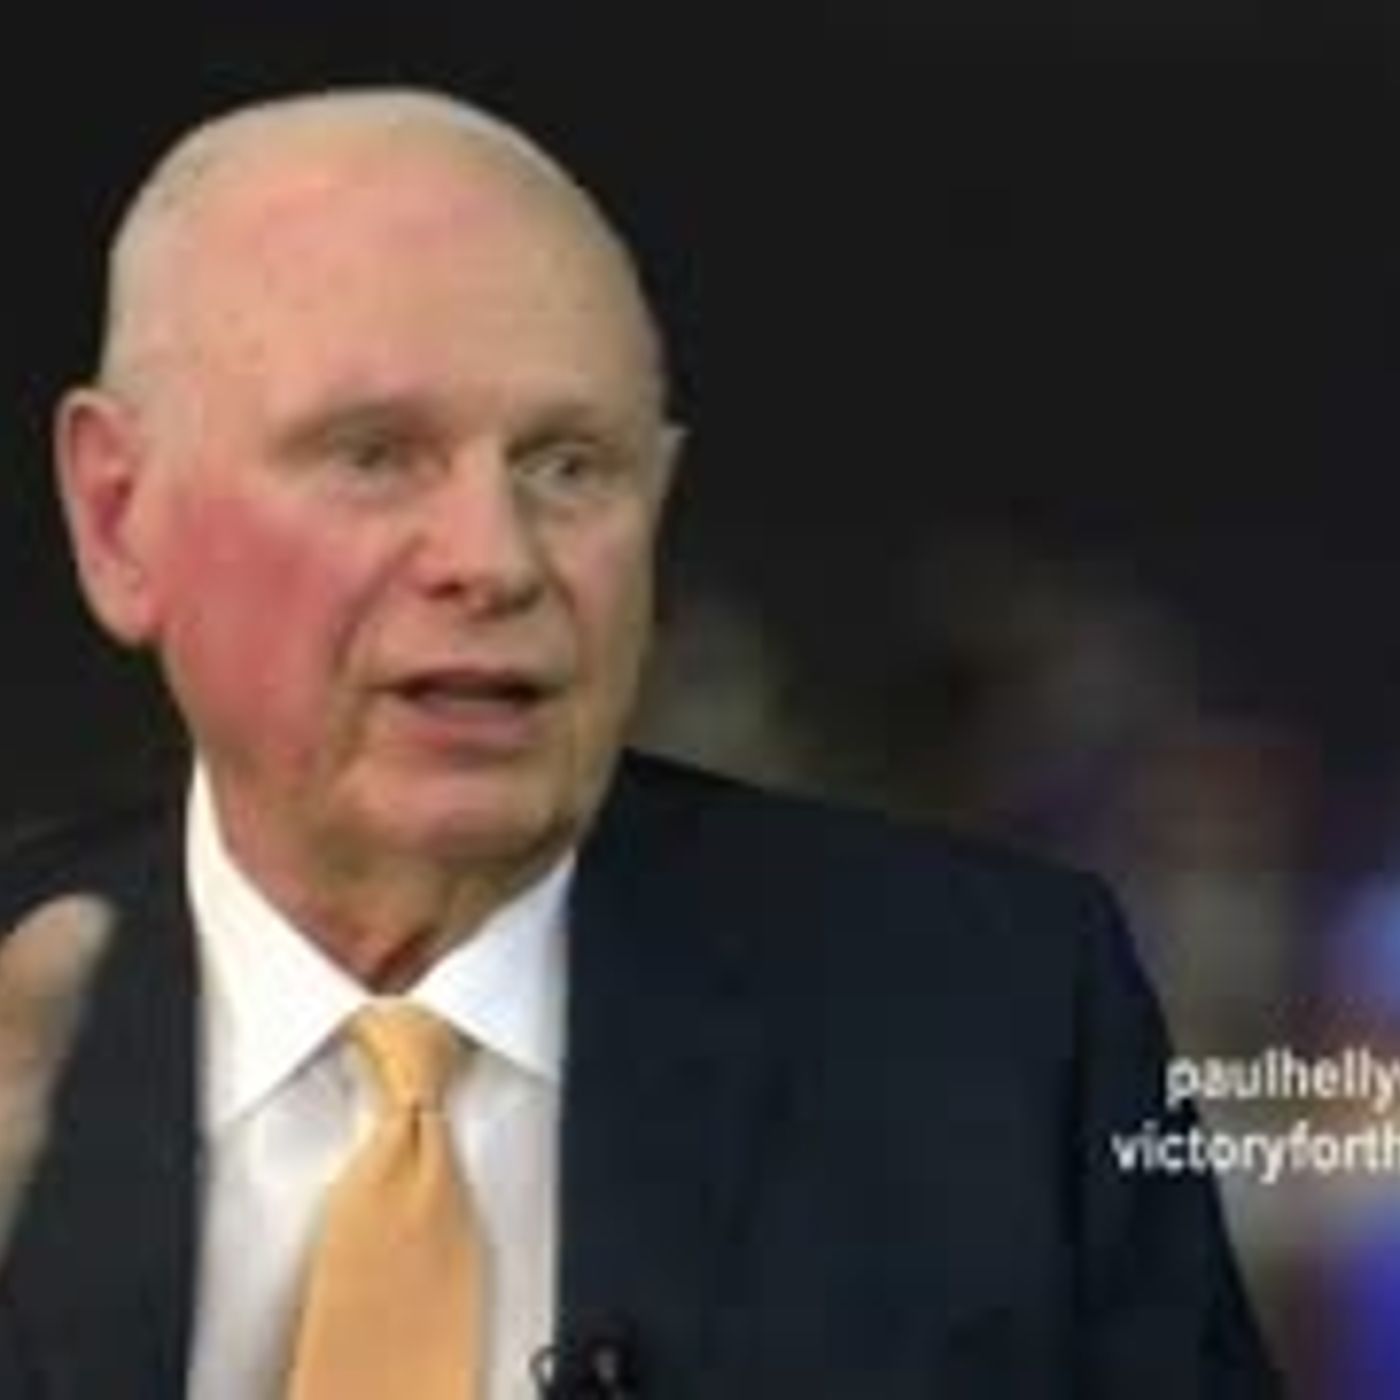 End tax and financial slavery now with Paul Hellyer